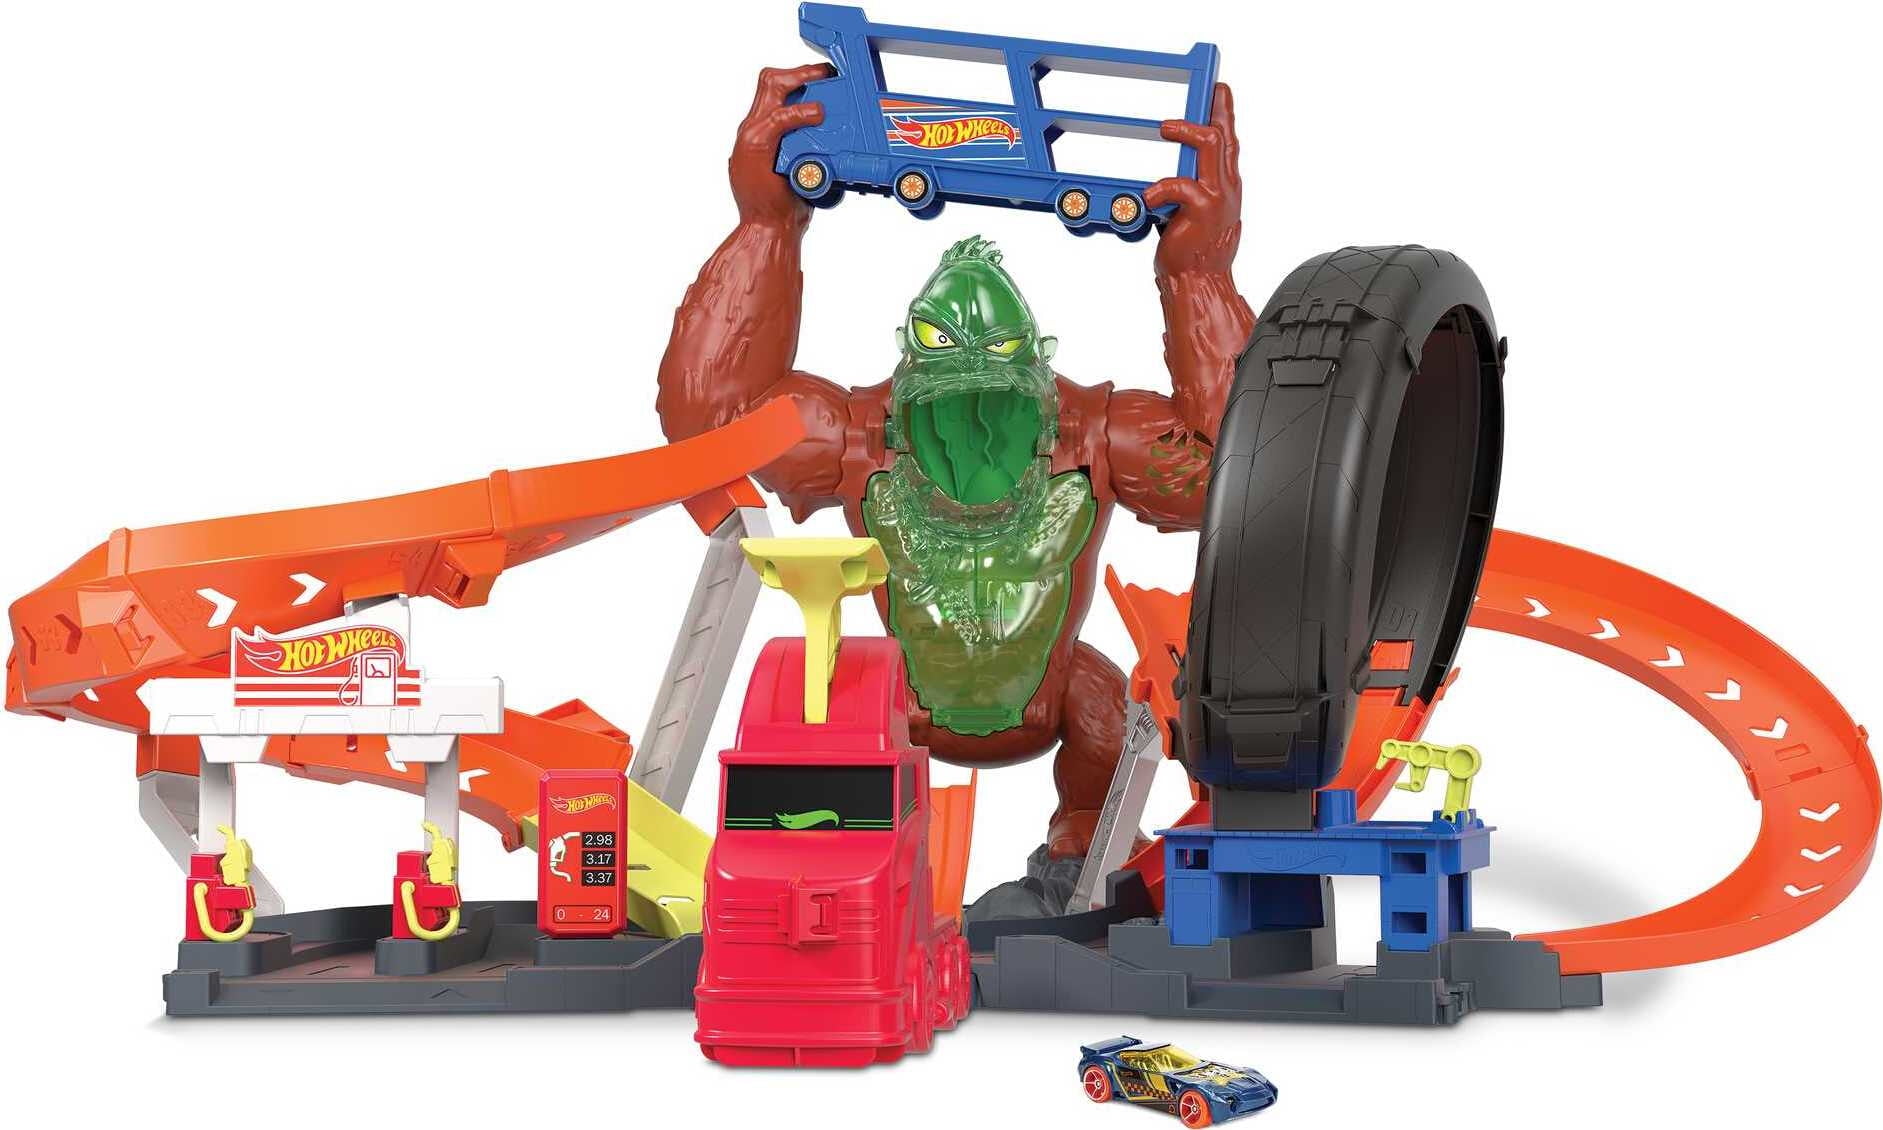 Hot Wheels Toxic Gorilla Slam Playset with Lights & Sounds for Kids 5 Years & Older